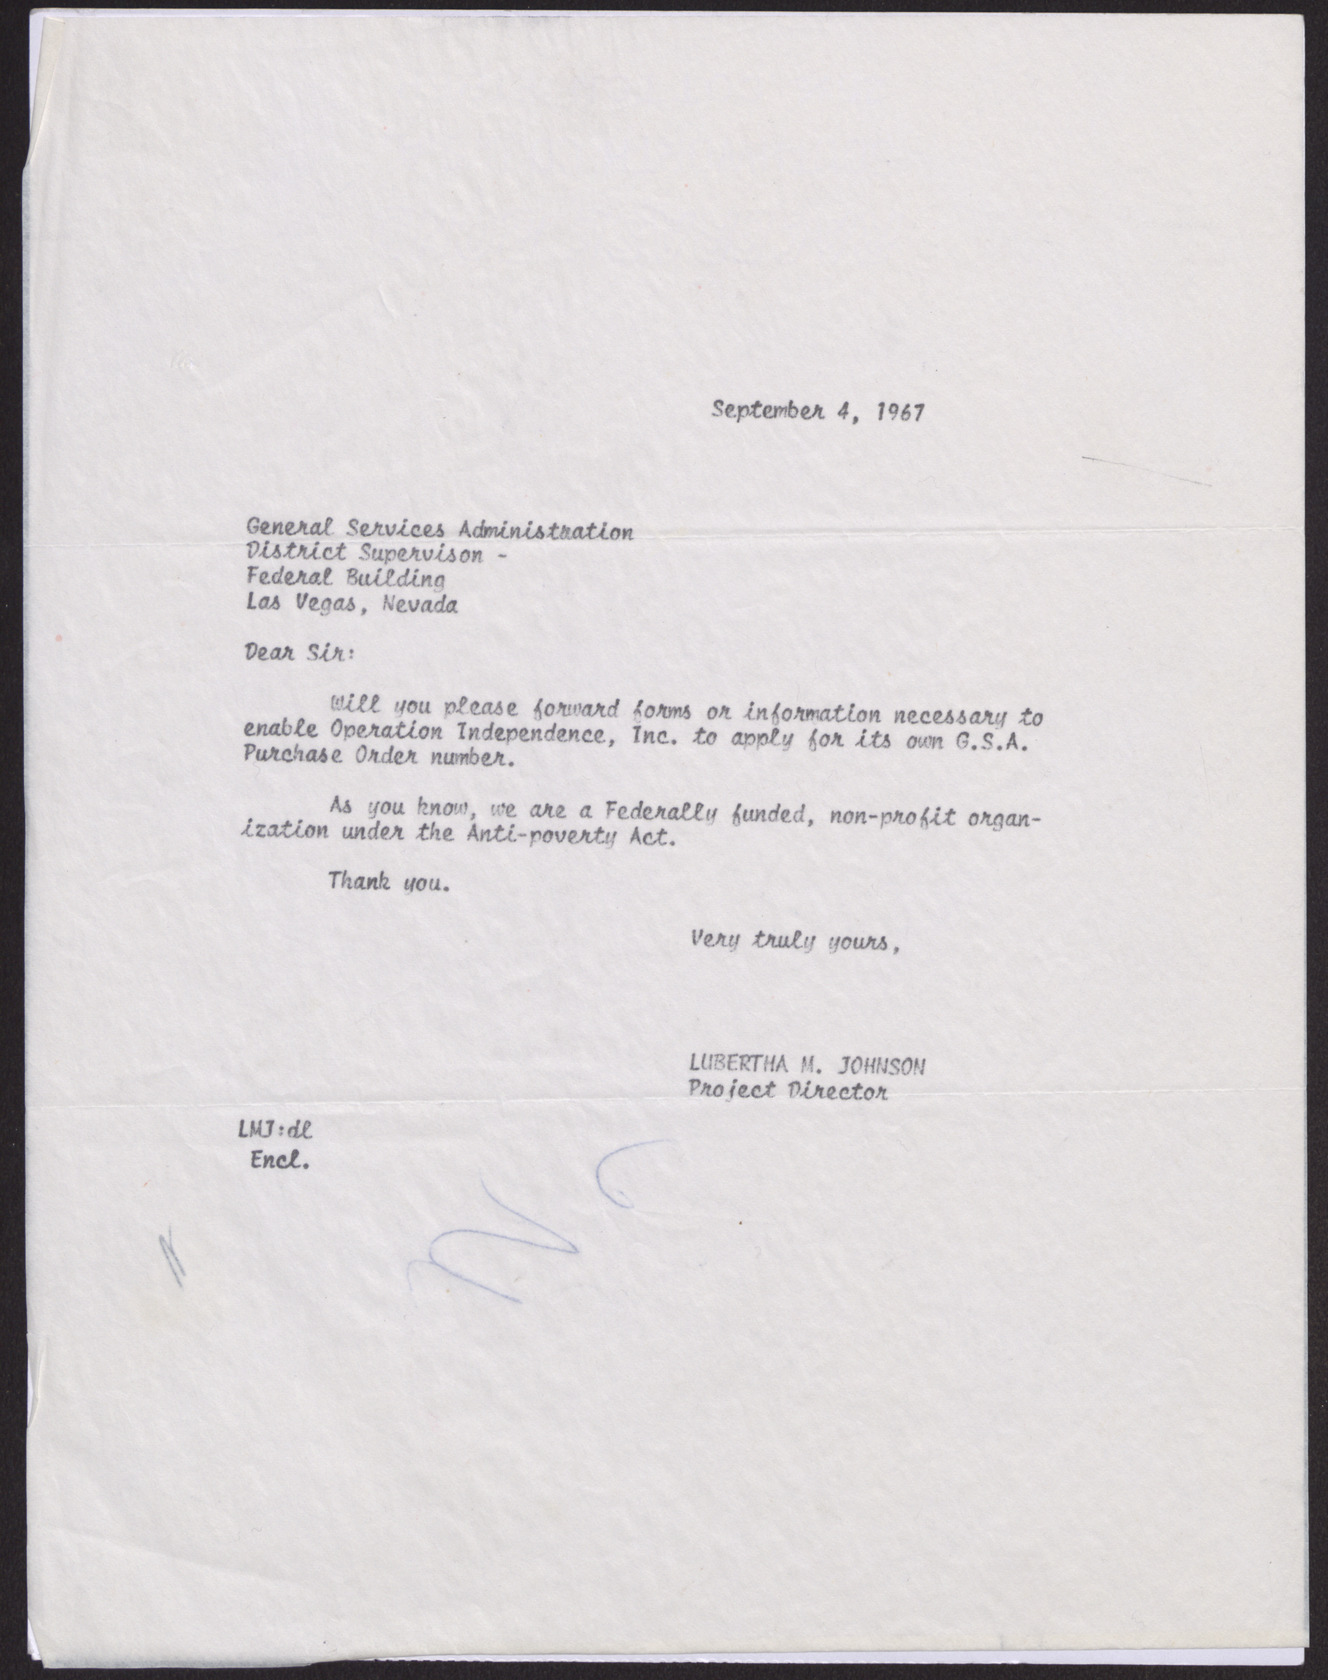 Letter to General Services Administration office from Lubertha M. Johnson, September 4, 1967